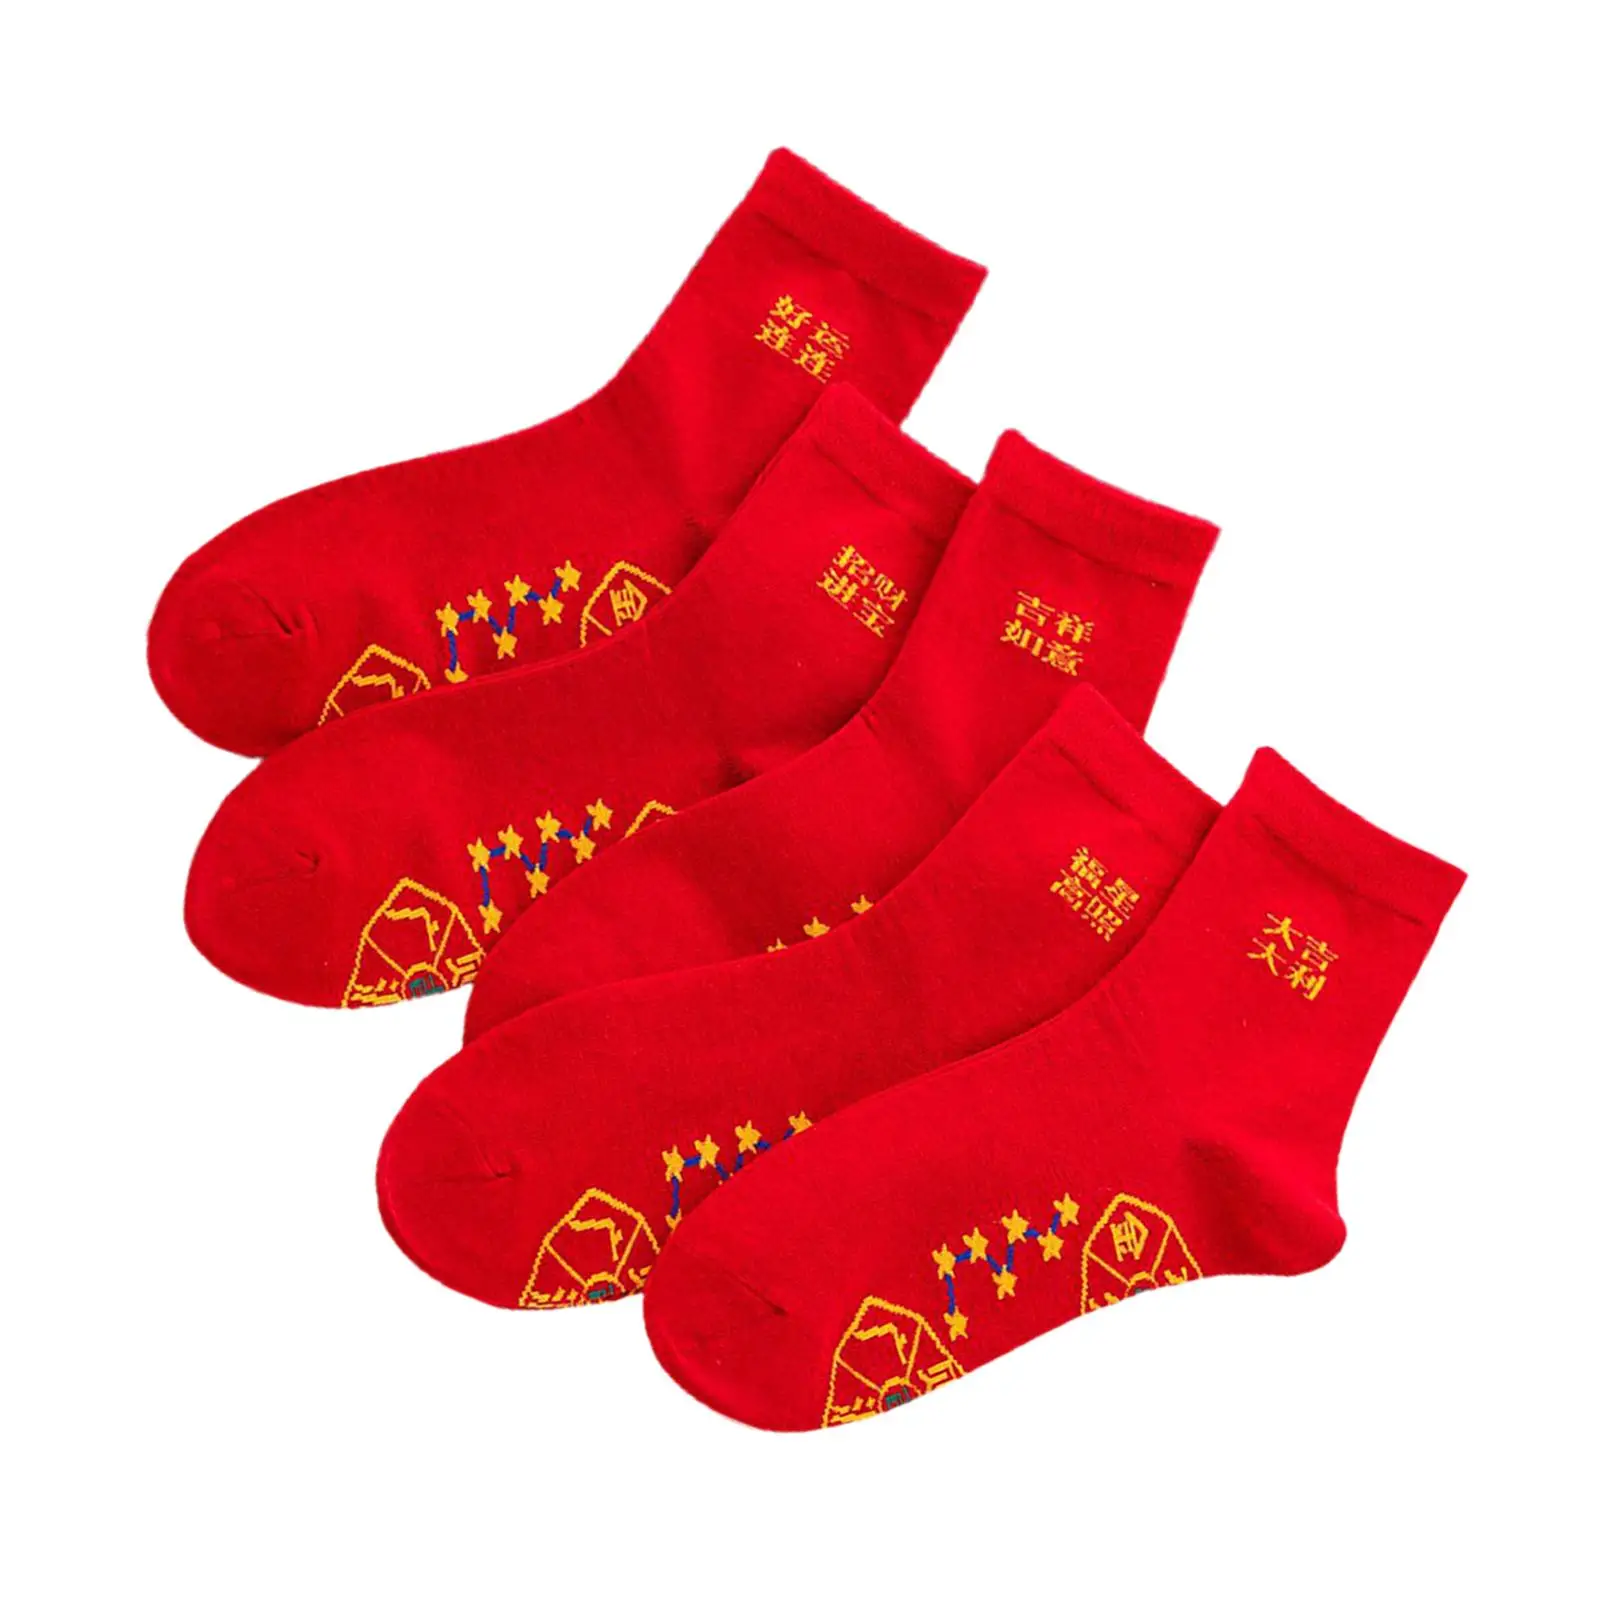 5 Pairs Chinese New Year Red Socks Soft Warm Winter Breathable Novelty Gifts Ankle Socks for Men Women Spring Festival Socks